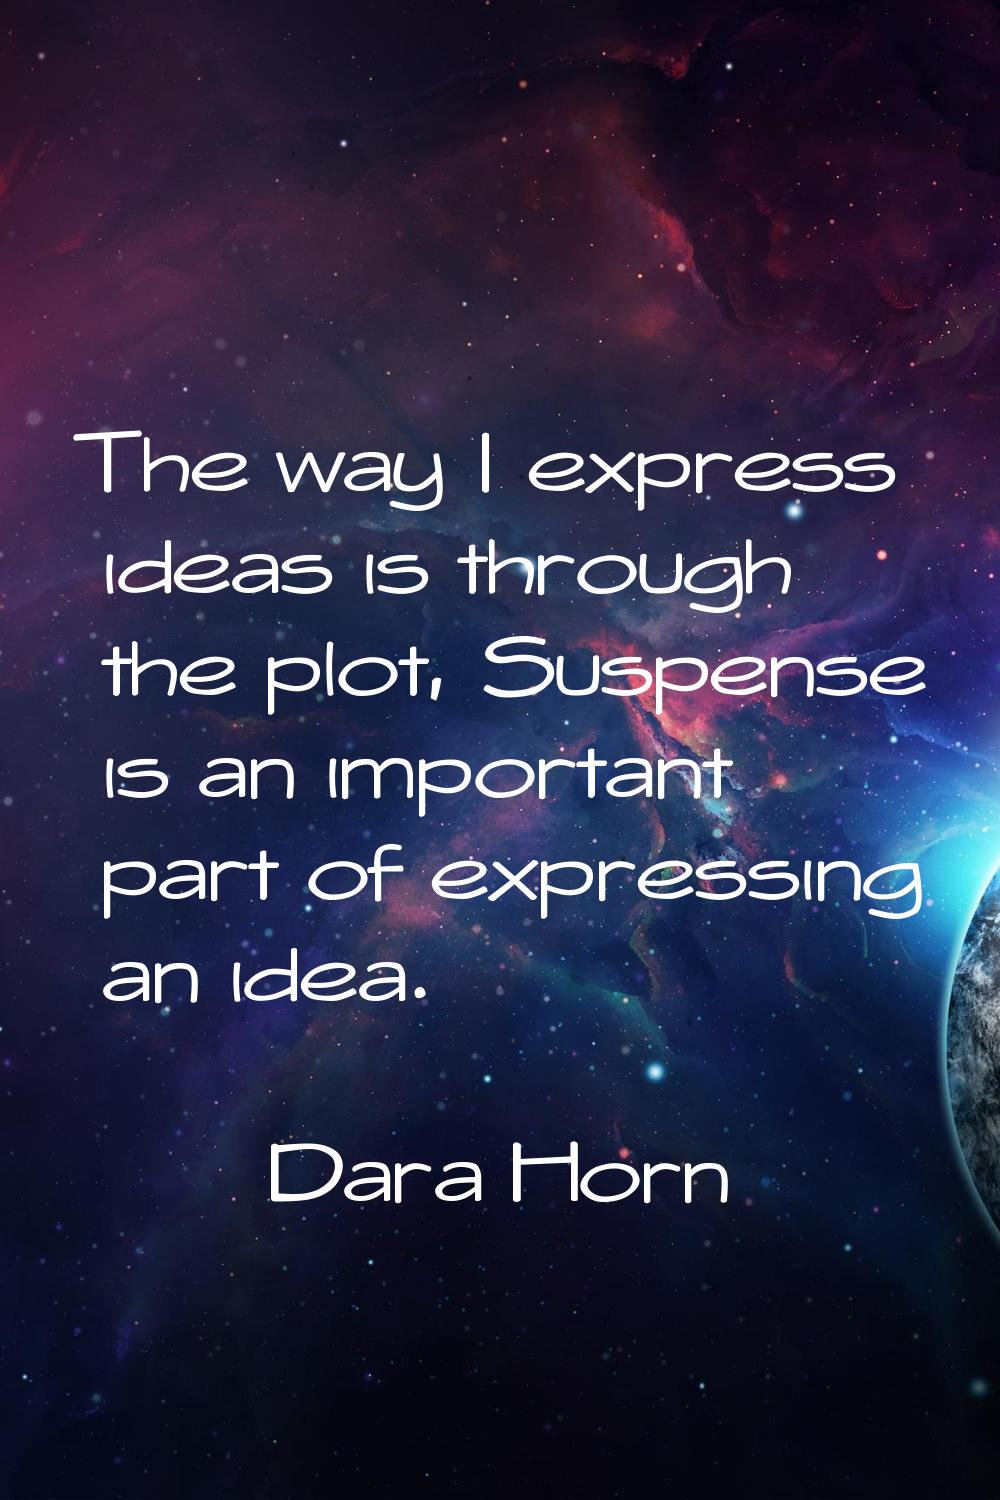 The way I express ideas is through the plot, Suspense is an important part of expressing an idea.